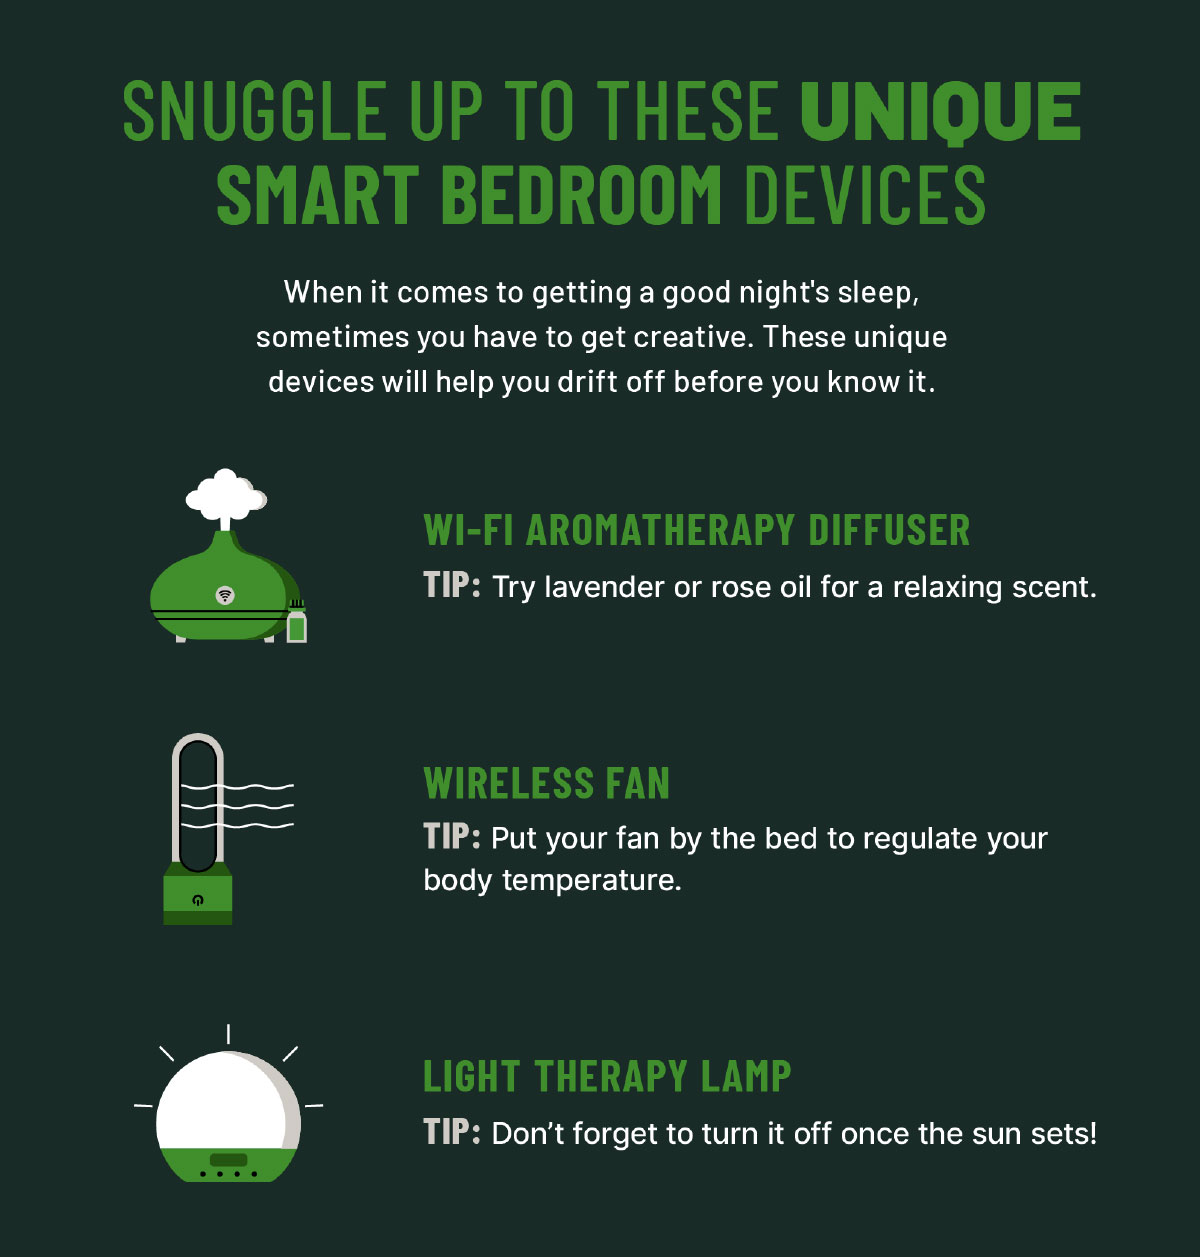 Different types of smart bedroom devices